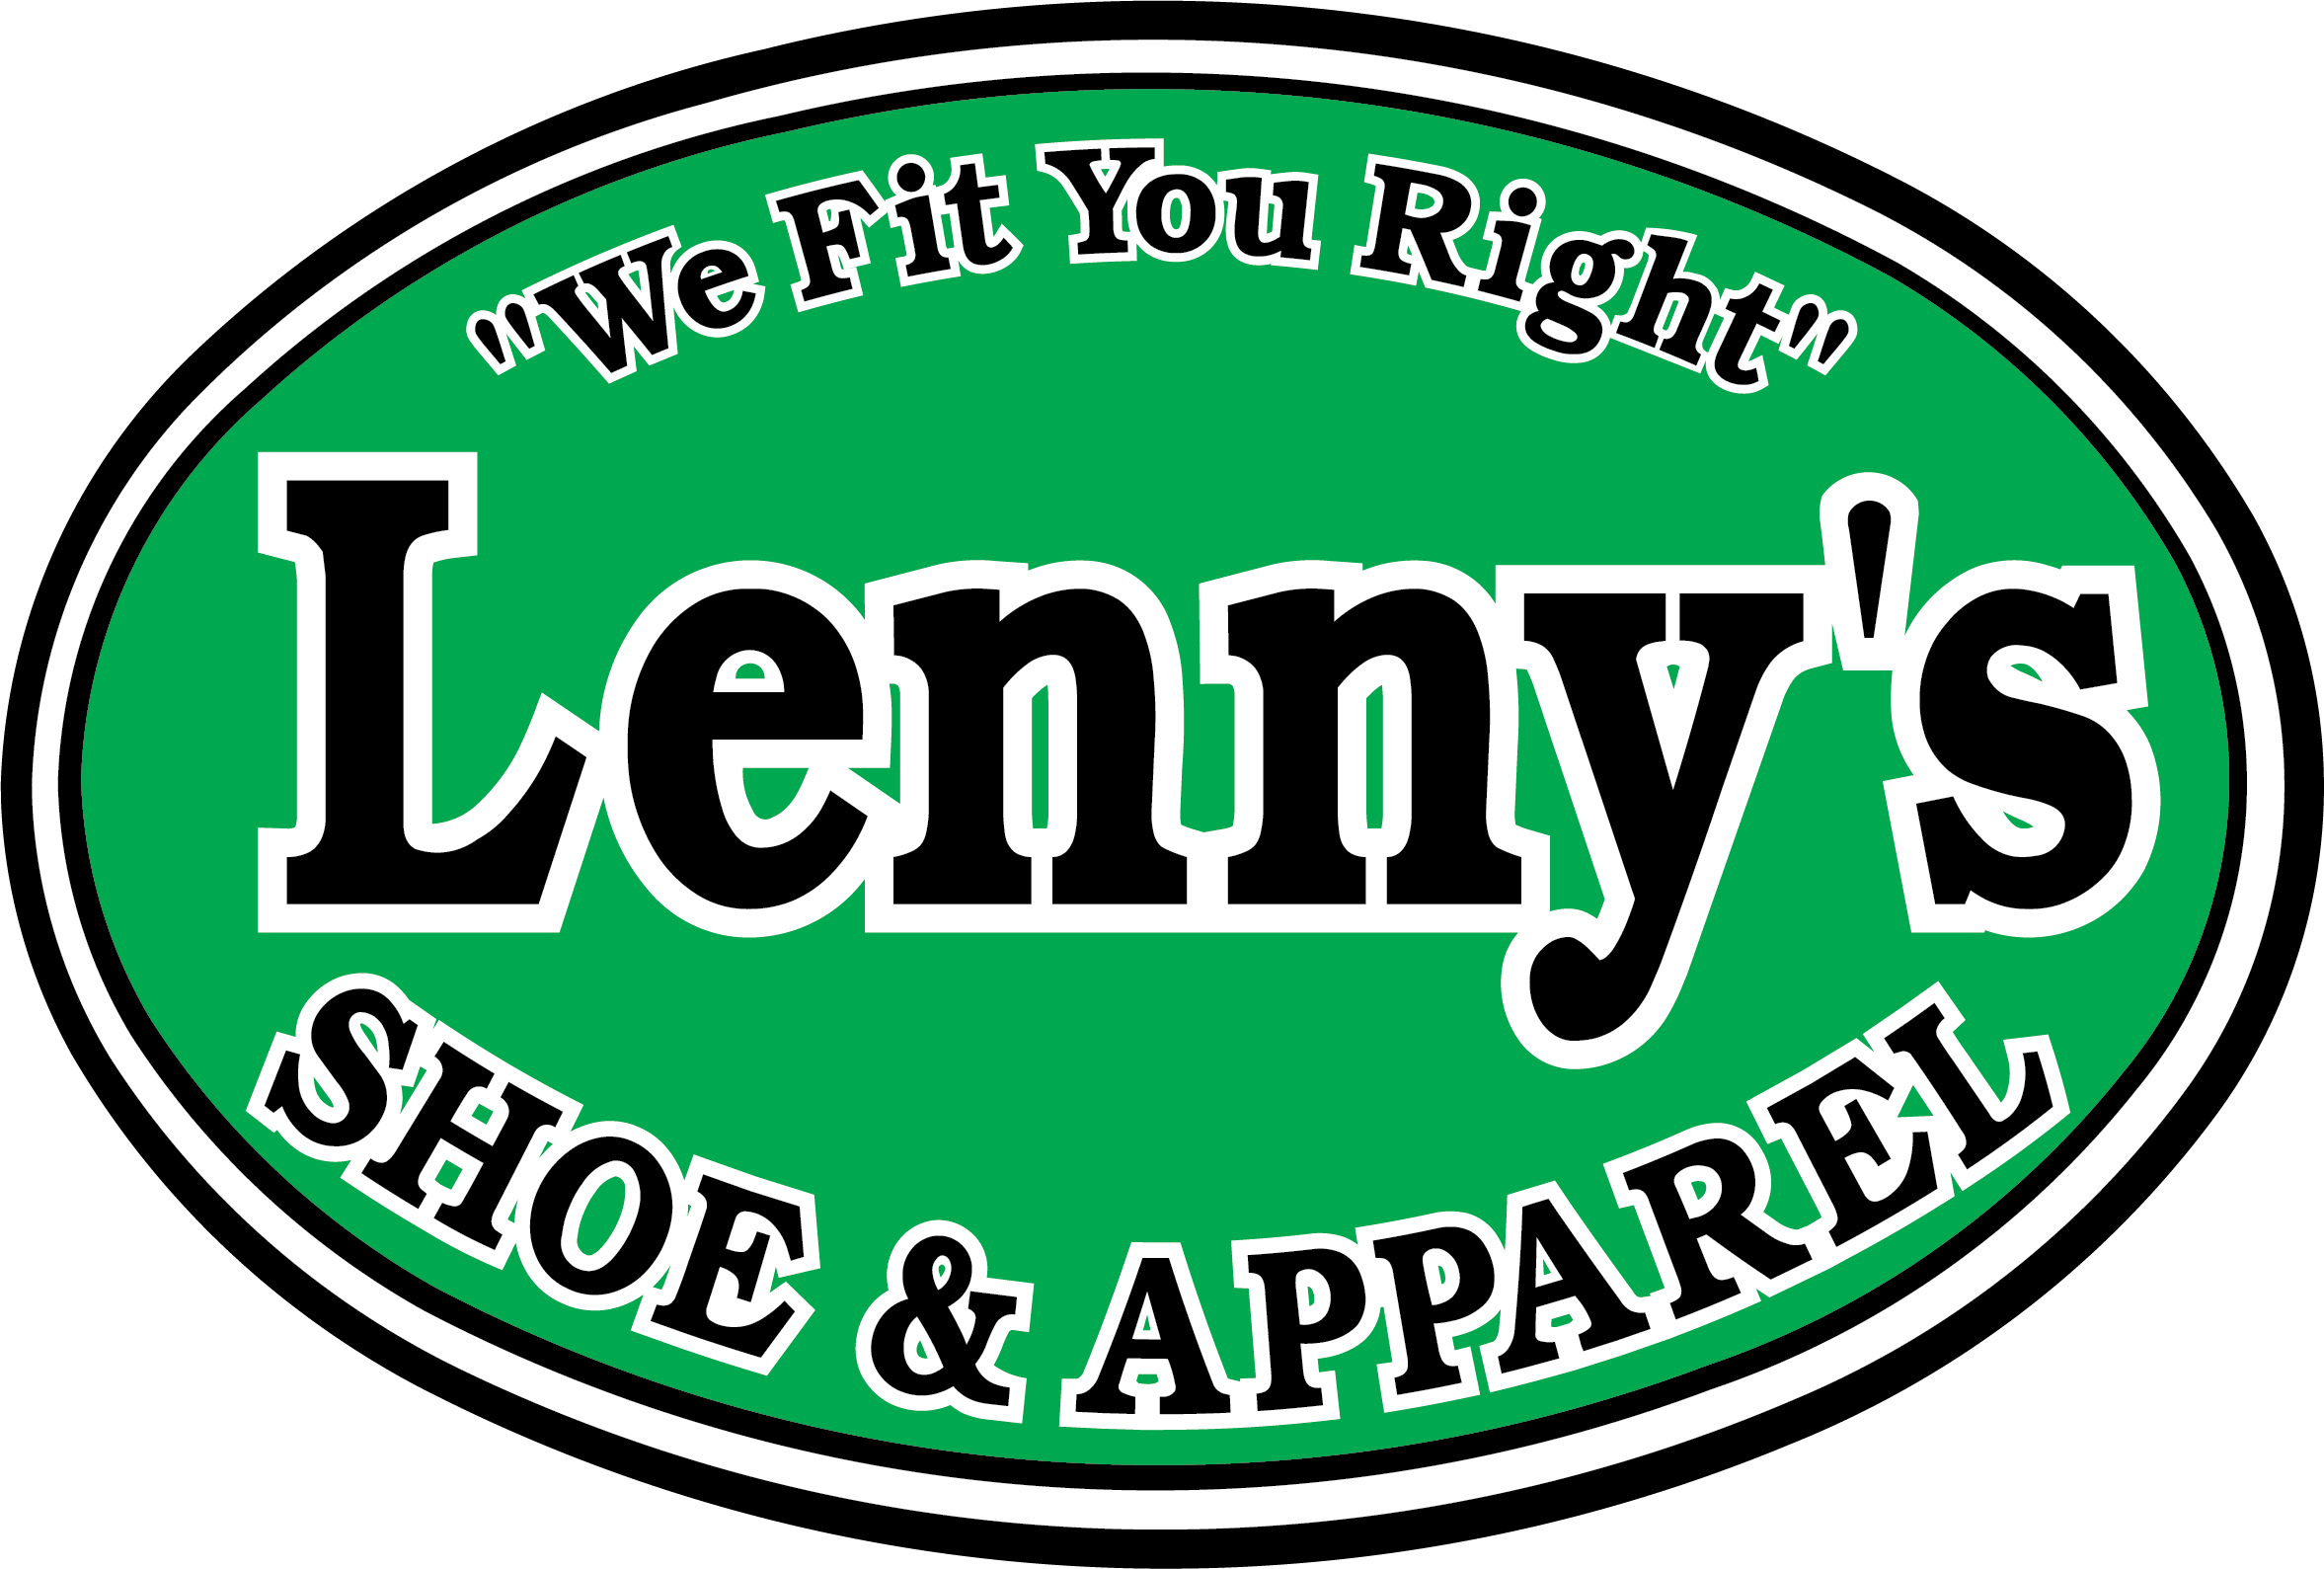 Shoes and Apparel Logo - Footwear's Shoe and Apparel